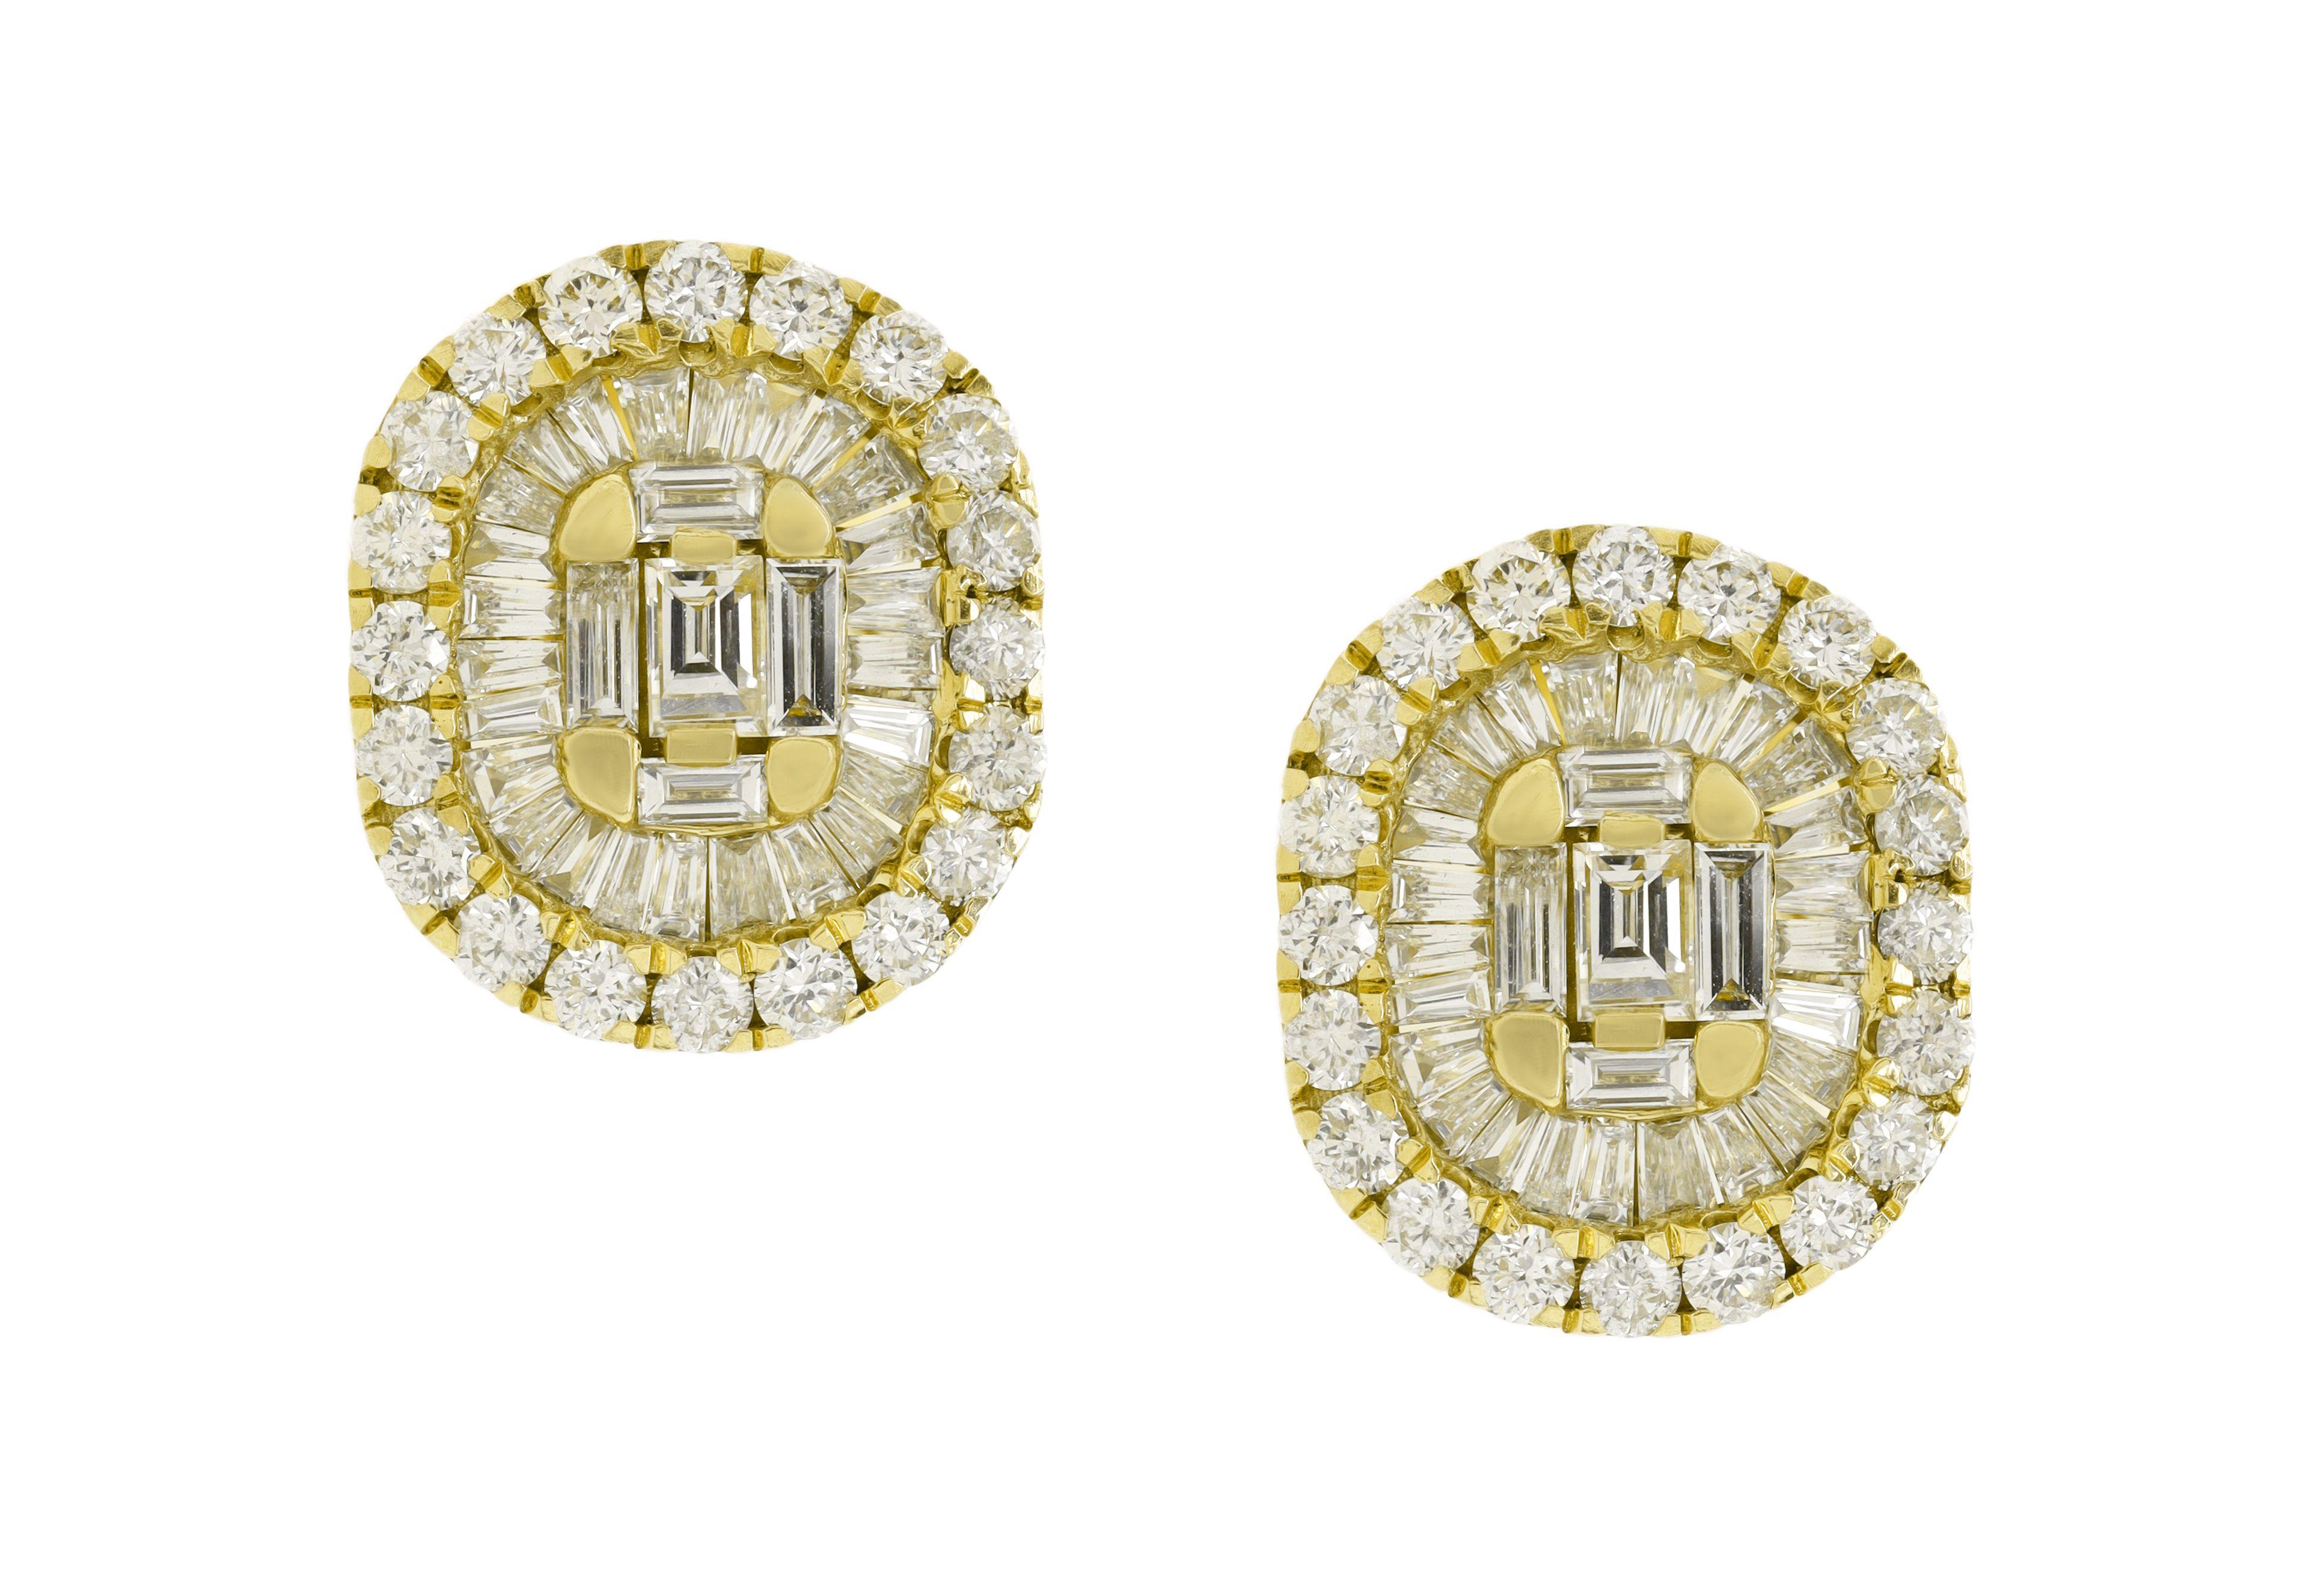 14K Yellow Gold Diamond Earrings featuring 1.87 Carats of Diamonds

Underline your look with this sharp 14K Yellow gold shape Diamond Earrings. High quality Diamonds. This Earrings will underline your exquisite look for any occasion.

. is a leading